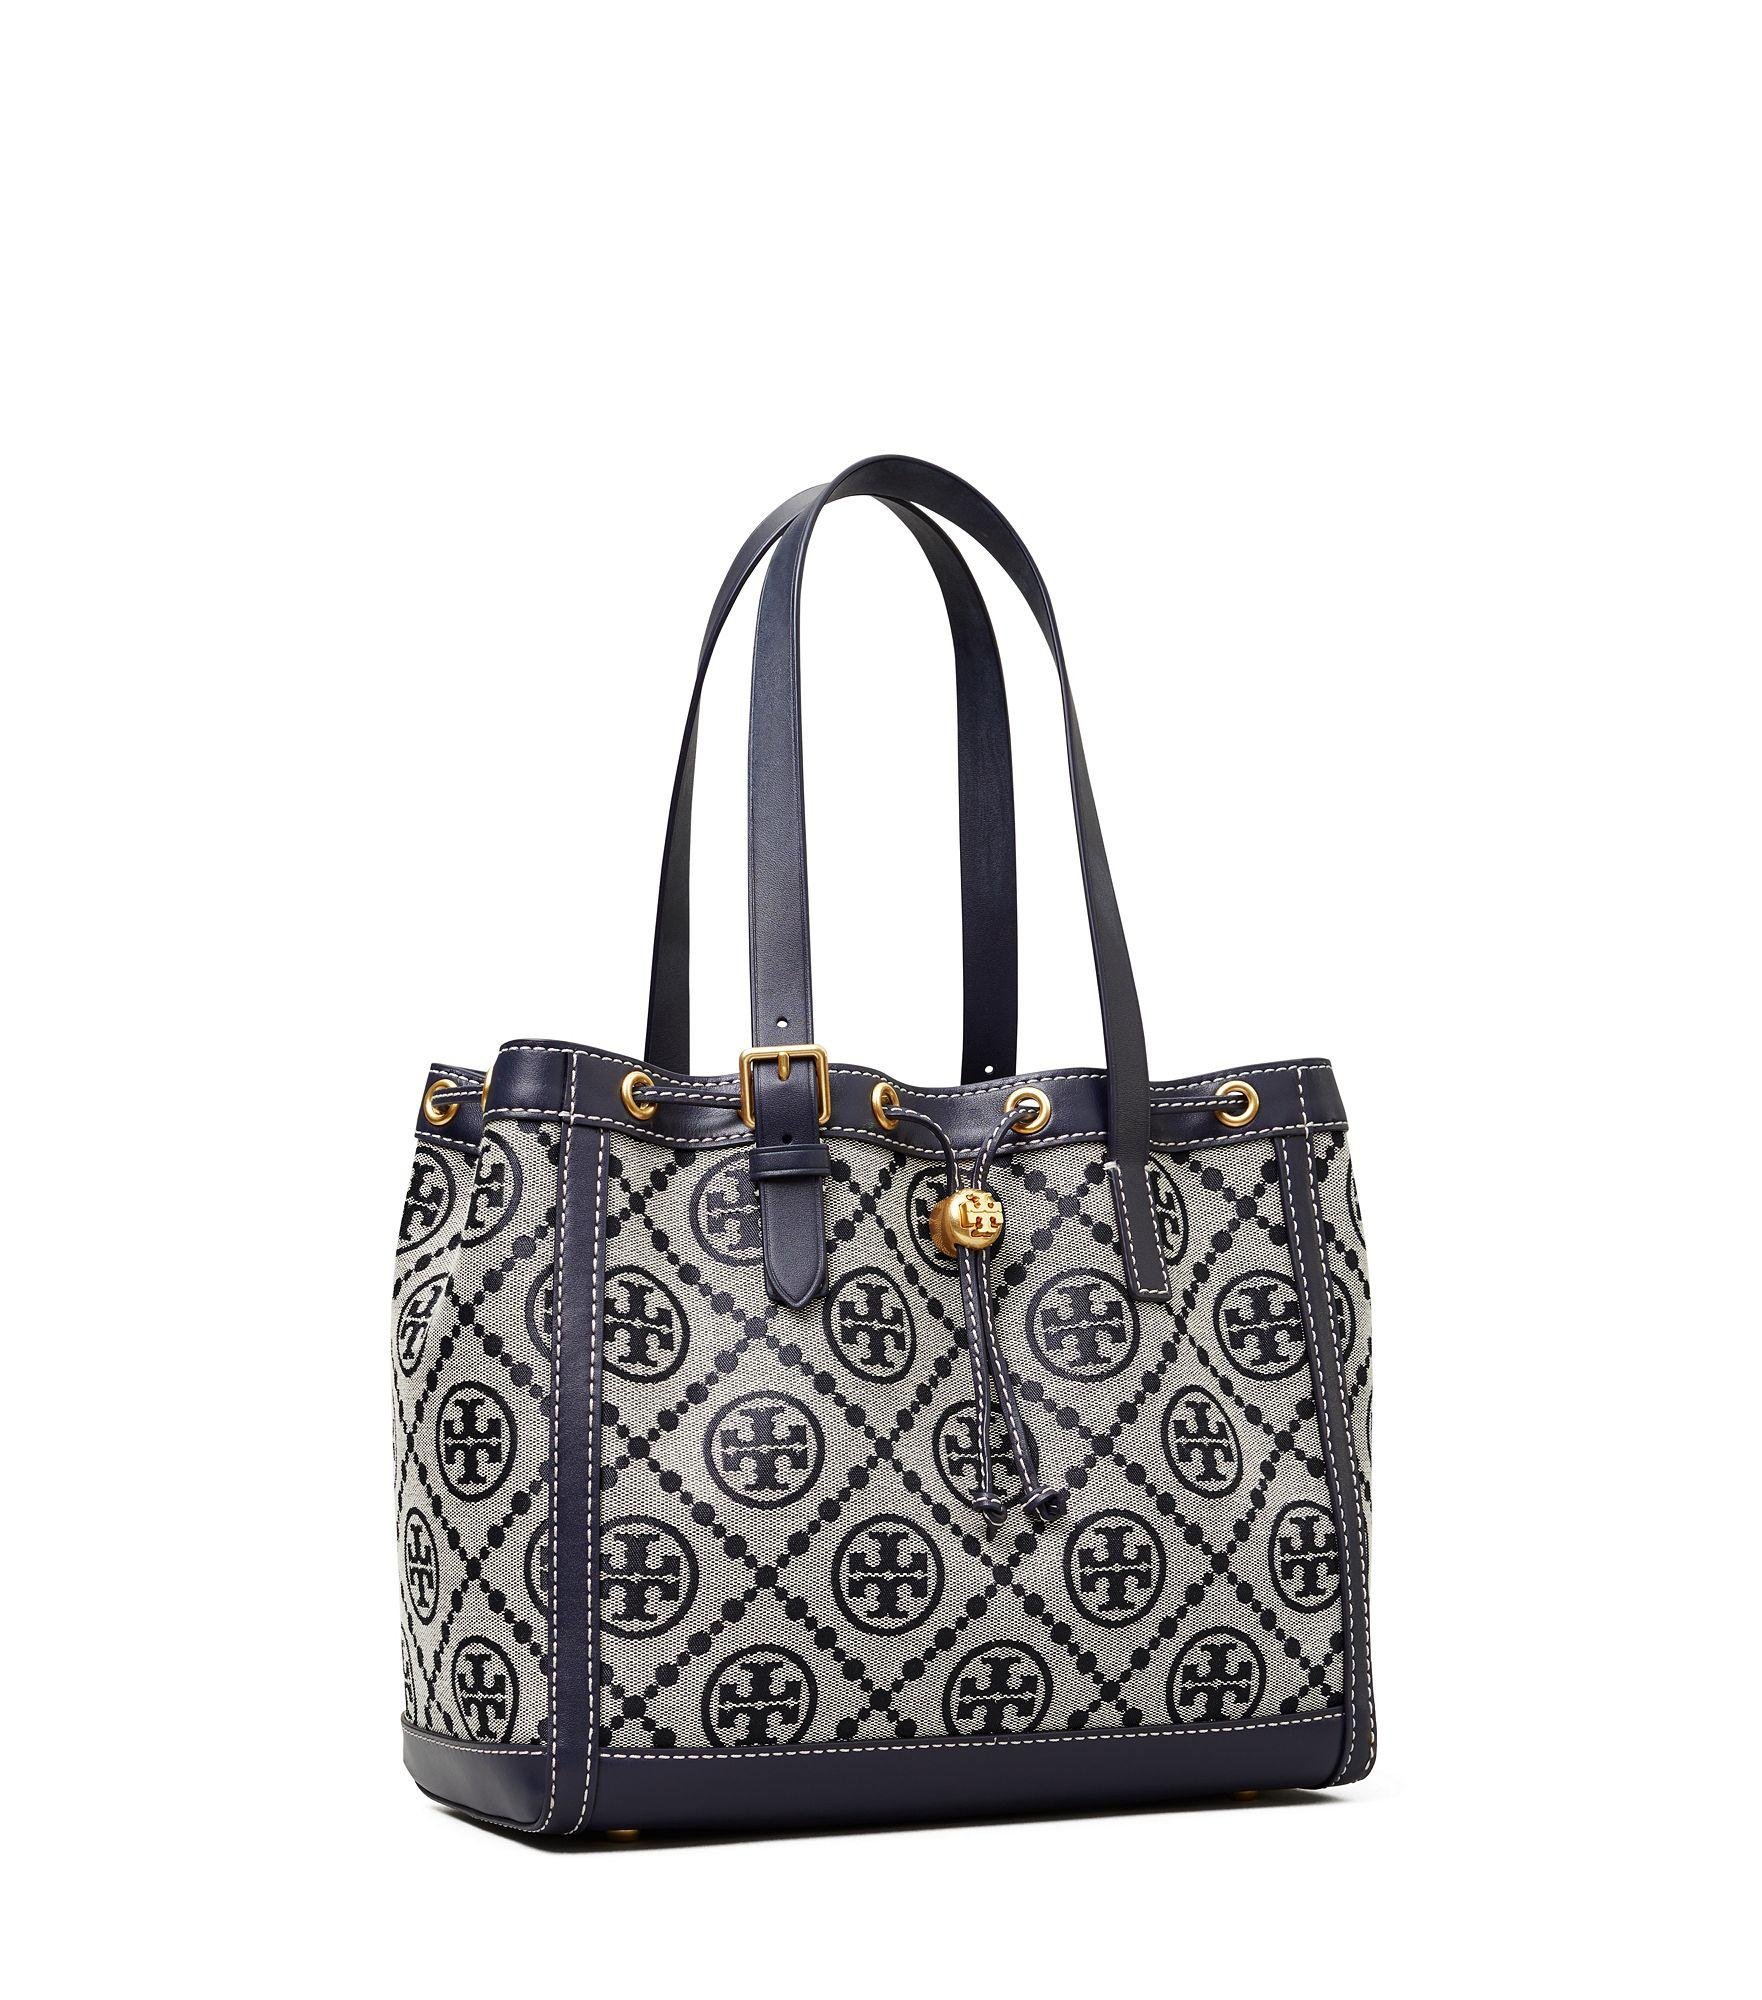 NWOT/B Tory Burch T Monogram Tote , Navy Blue Coated Canvas / Leather